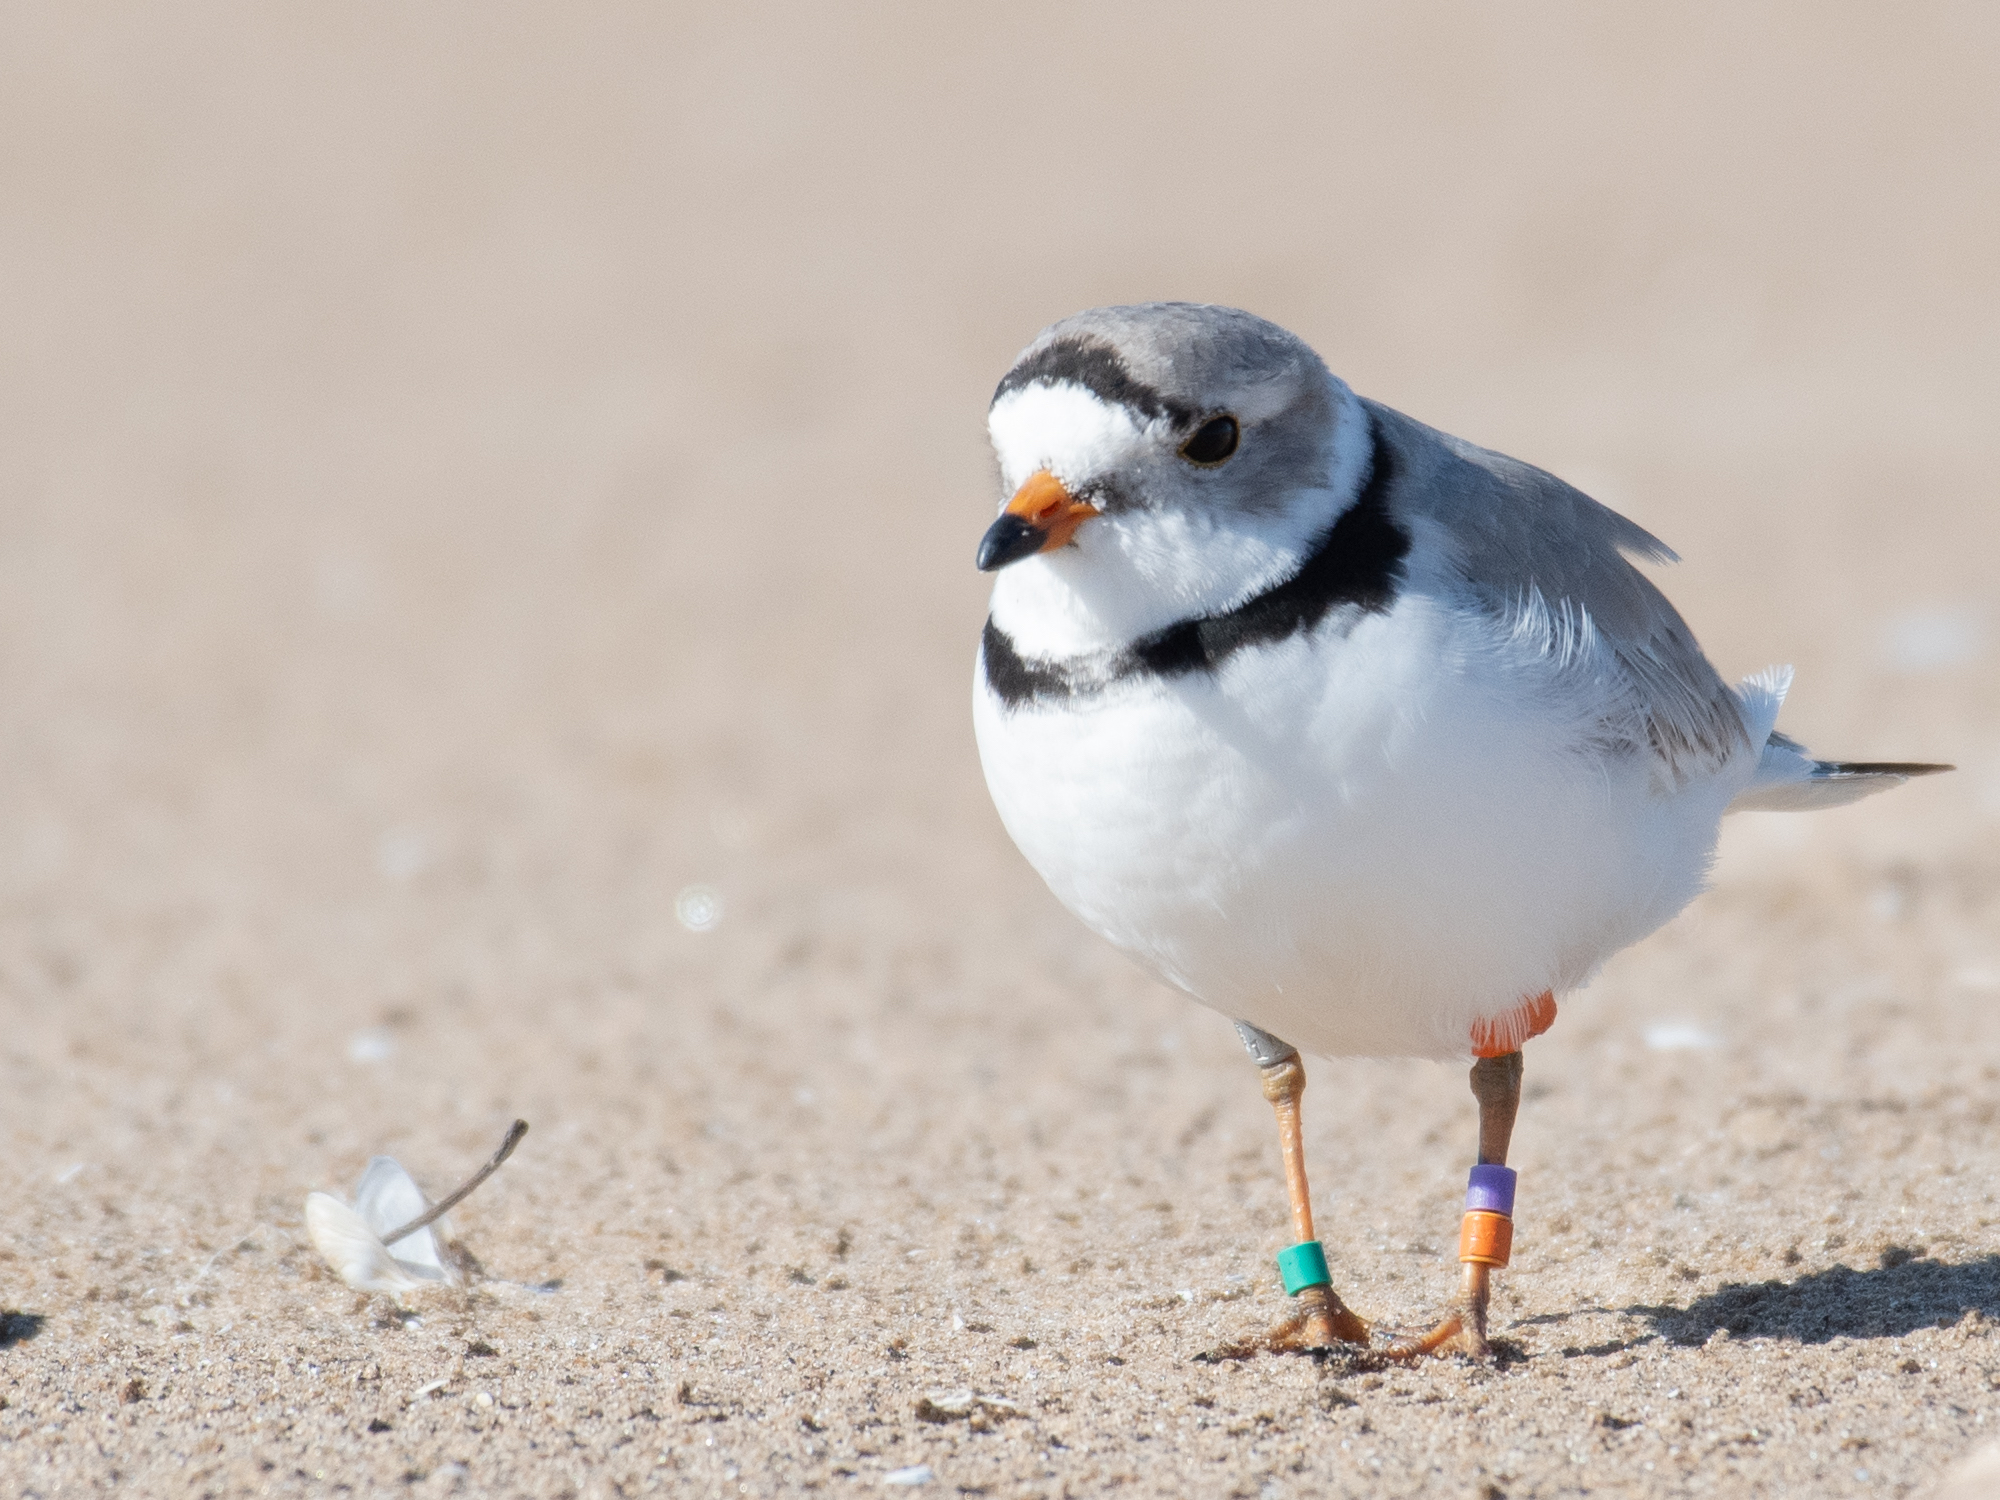 A piping plover shorebird walks on sand, with tawny feathers on his back, a white stomach, a black band of feathers on his neck, and a green band on his ankle